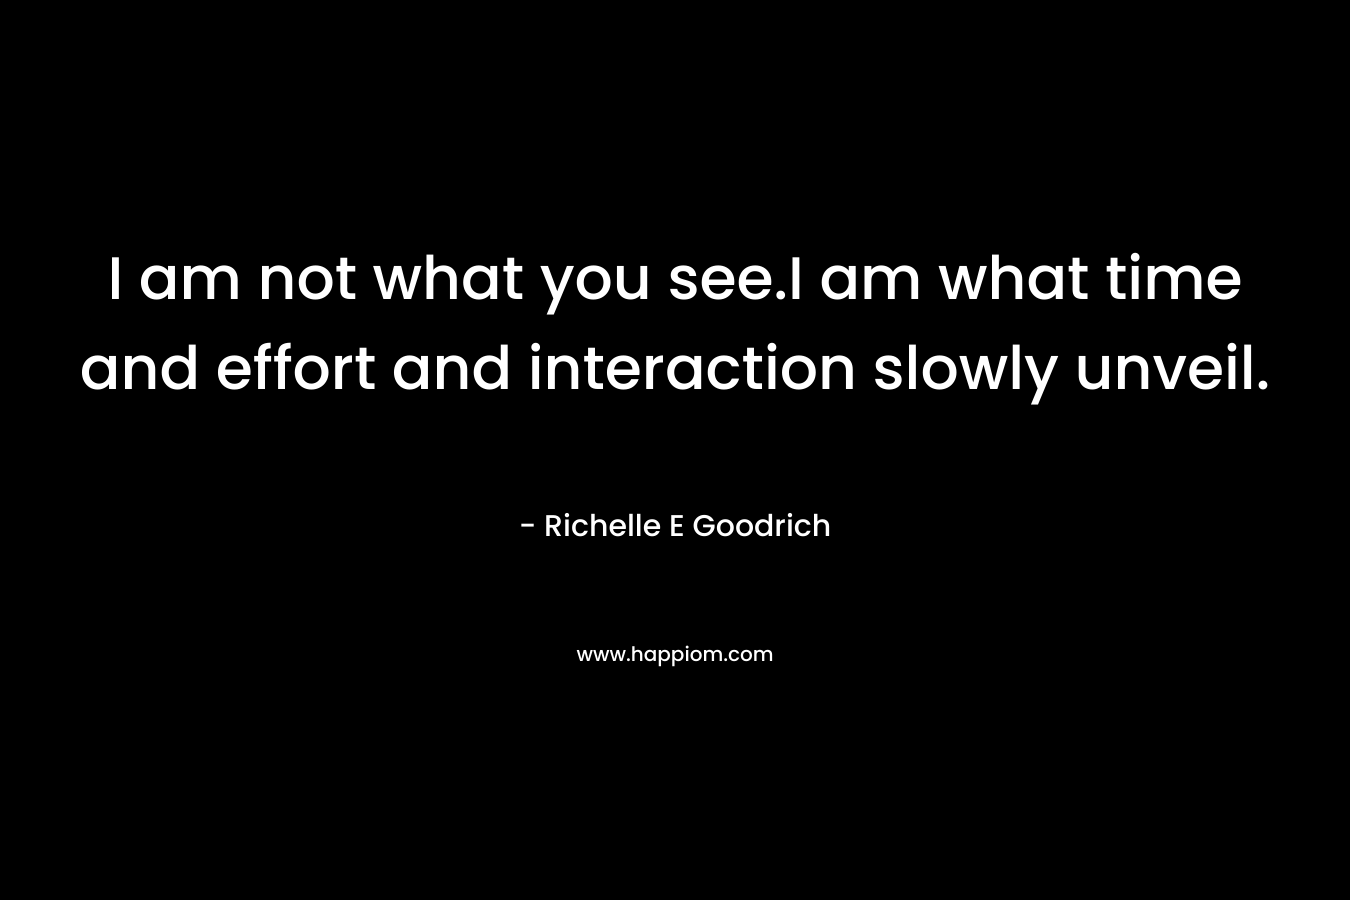 I am not what you see.I am what time and effort and interaction slowly unveil. – Richelle E Goodrich